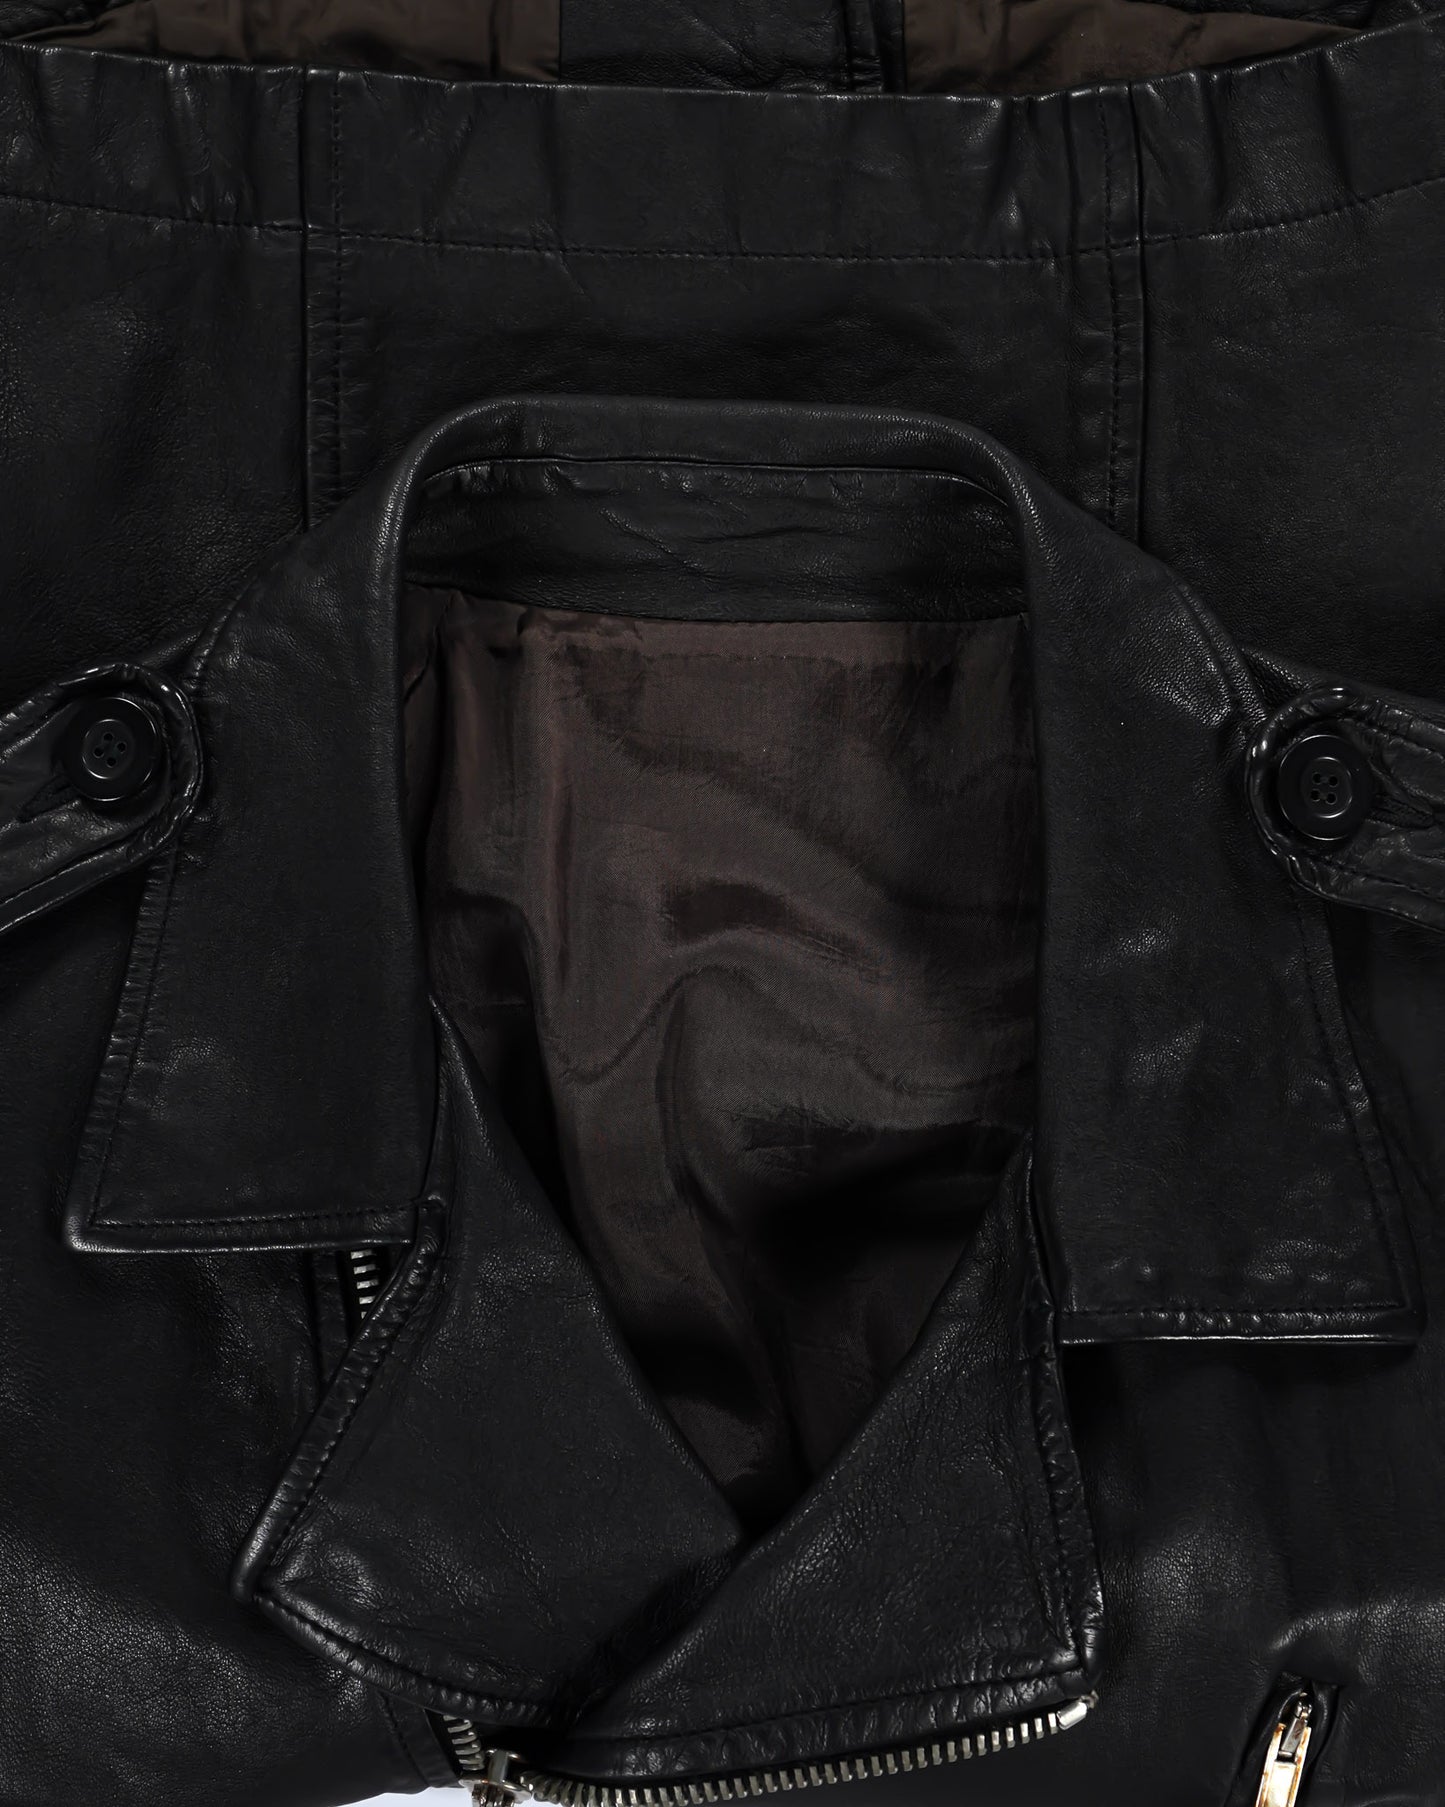 Rick Owens “Stooges” Runway Leather Jacket - SS08 “Creatch”